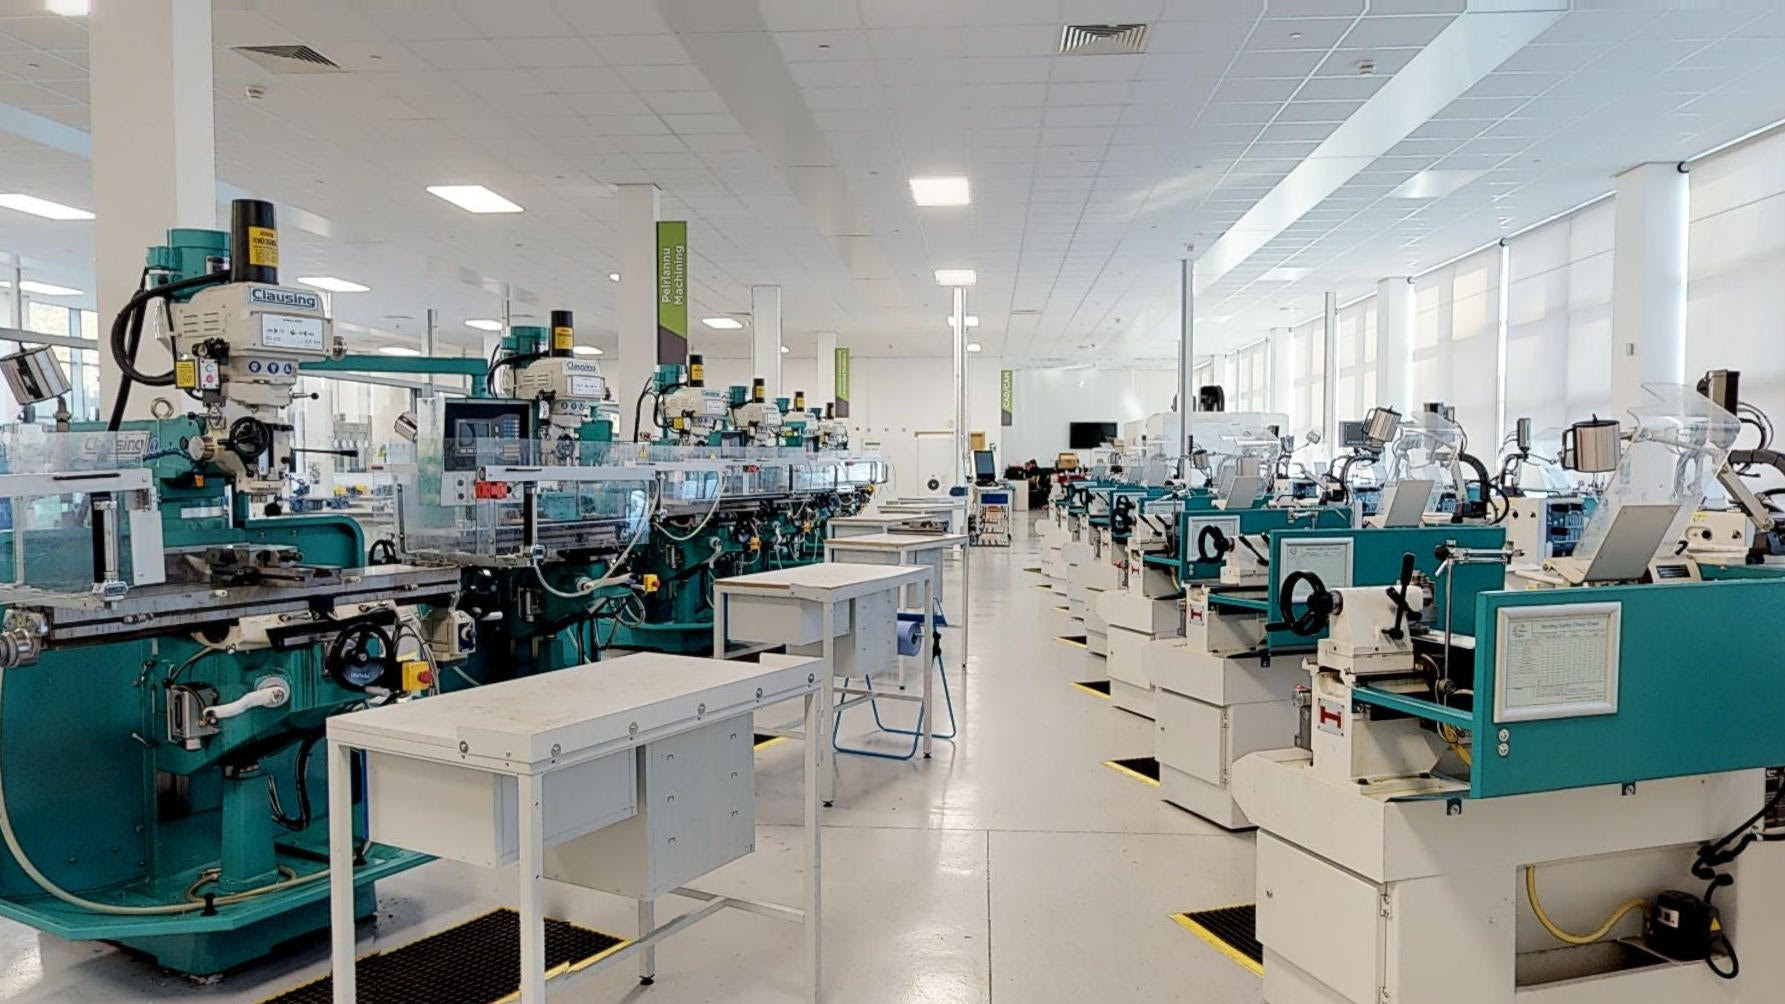 The engineering technology centre at Bersham Road, with a large amount of work stations and machinery